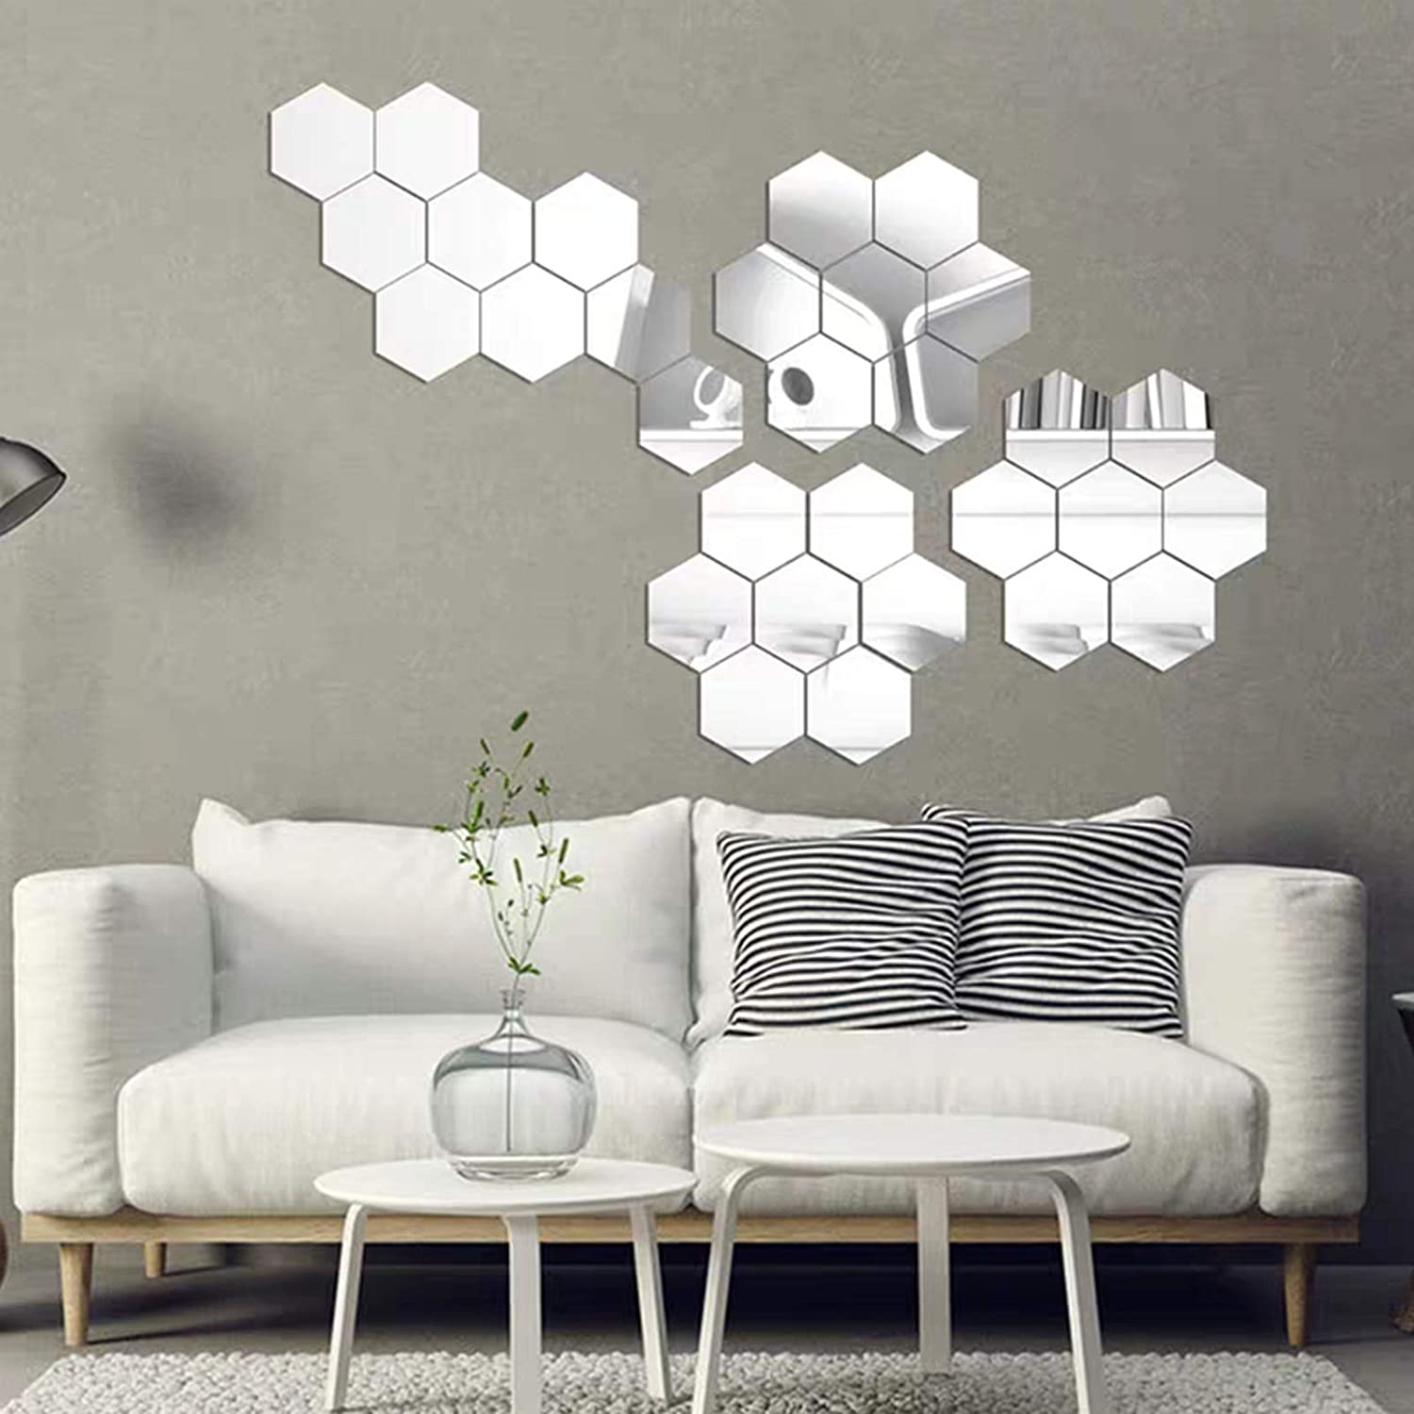 24 Pieces Removable Acrylic Hexagonal Mirror Wall Sticker Decal for Home Living Room Bedroom Decor Art DIY Home Decoration